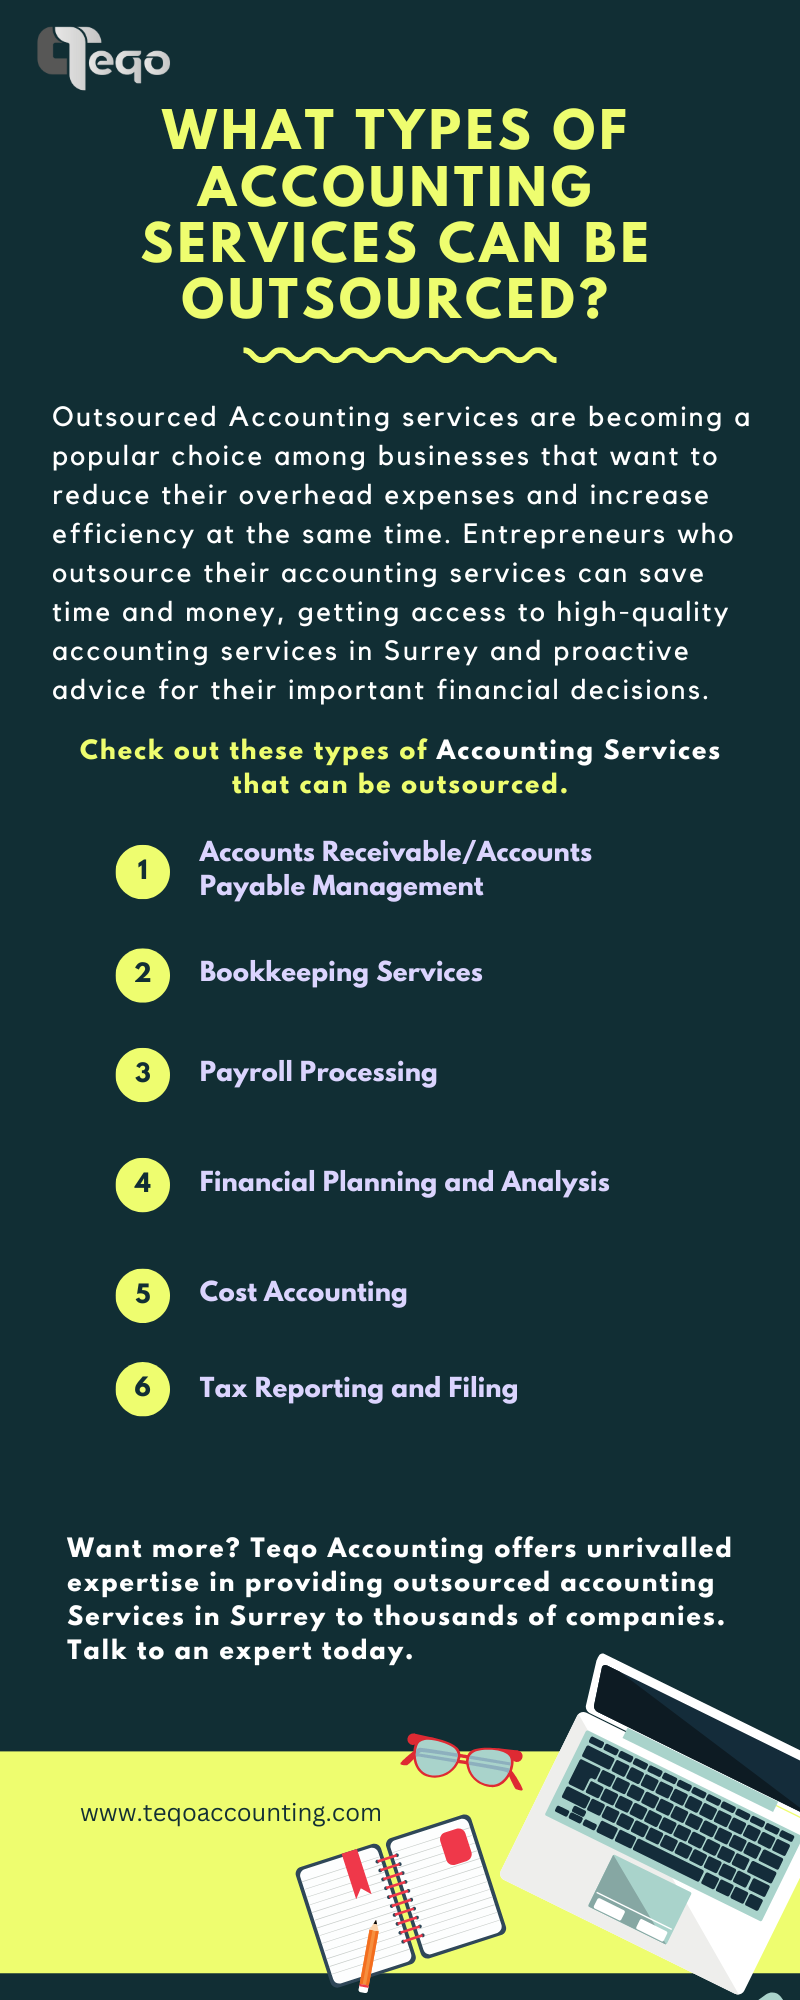 Cie
WHAT TYPES OF
ACCOUNTING

SERVICES CAN BE
OUTSOURCED?

 

Outsourced Accounting services are becoming a
popular choice among businesses that want to
reduce their overhead expenses and increase
efficiency at the same time. Entrepreneurs who
outsource their accounting services can save
time and money, getting access to high-quality
accounting services in Surrey and proactive
advice for their important financial decisions.

Check out these types of Accounting Services
(LC TR LN TWIST IVI ITT

Accounts Receivable/Accounts
Payable Management

ZY CET TT TU TH

Payroll Processing

[AGC LSCIR FRU ELE WG EYE

Cost Accounting

Tax Reporting and Filing

Want more? Teqo Accounting offers unrivalled
expertise in providing outsourced accounting
Services in Surrey to thousands of companies.
Talk to an expert today.

www.tegoaccounting.com